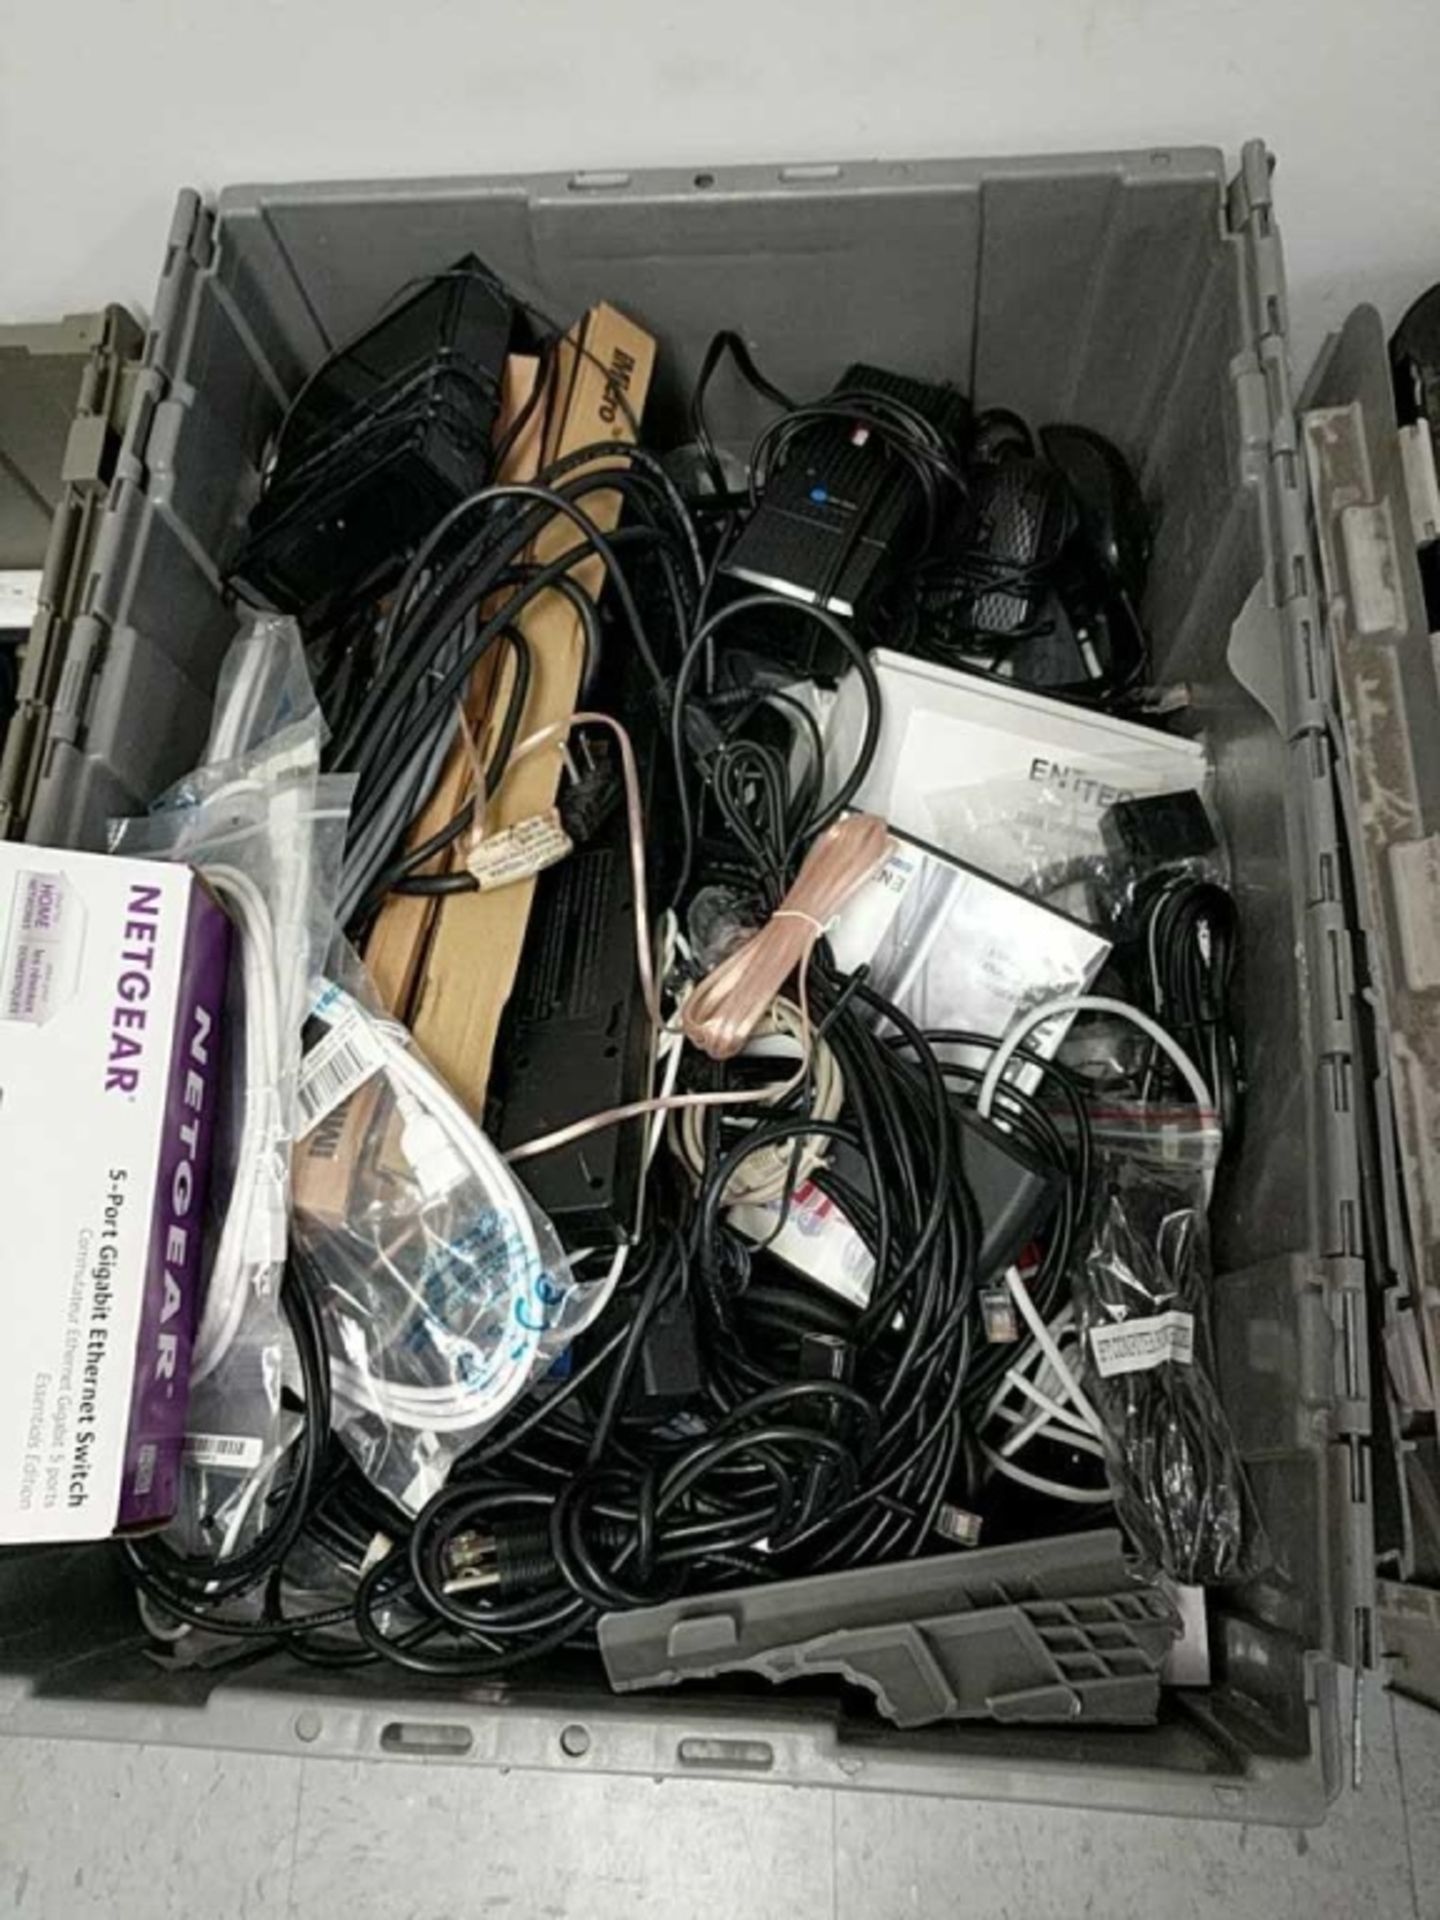 Lot of Assorted Networking Cables - Image 2 of 4